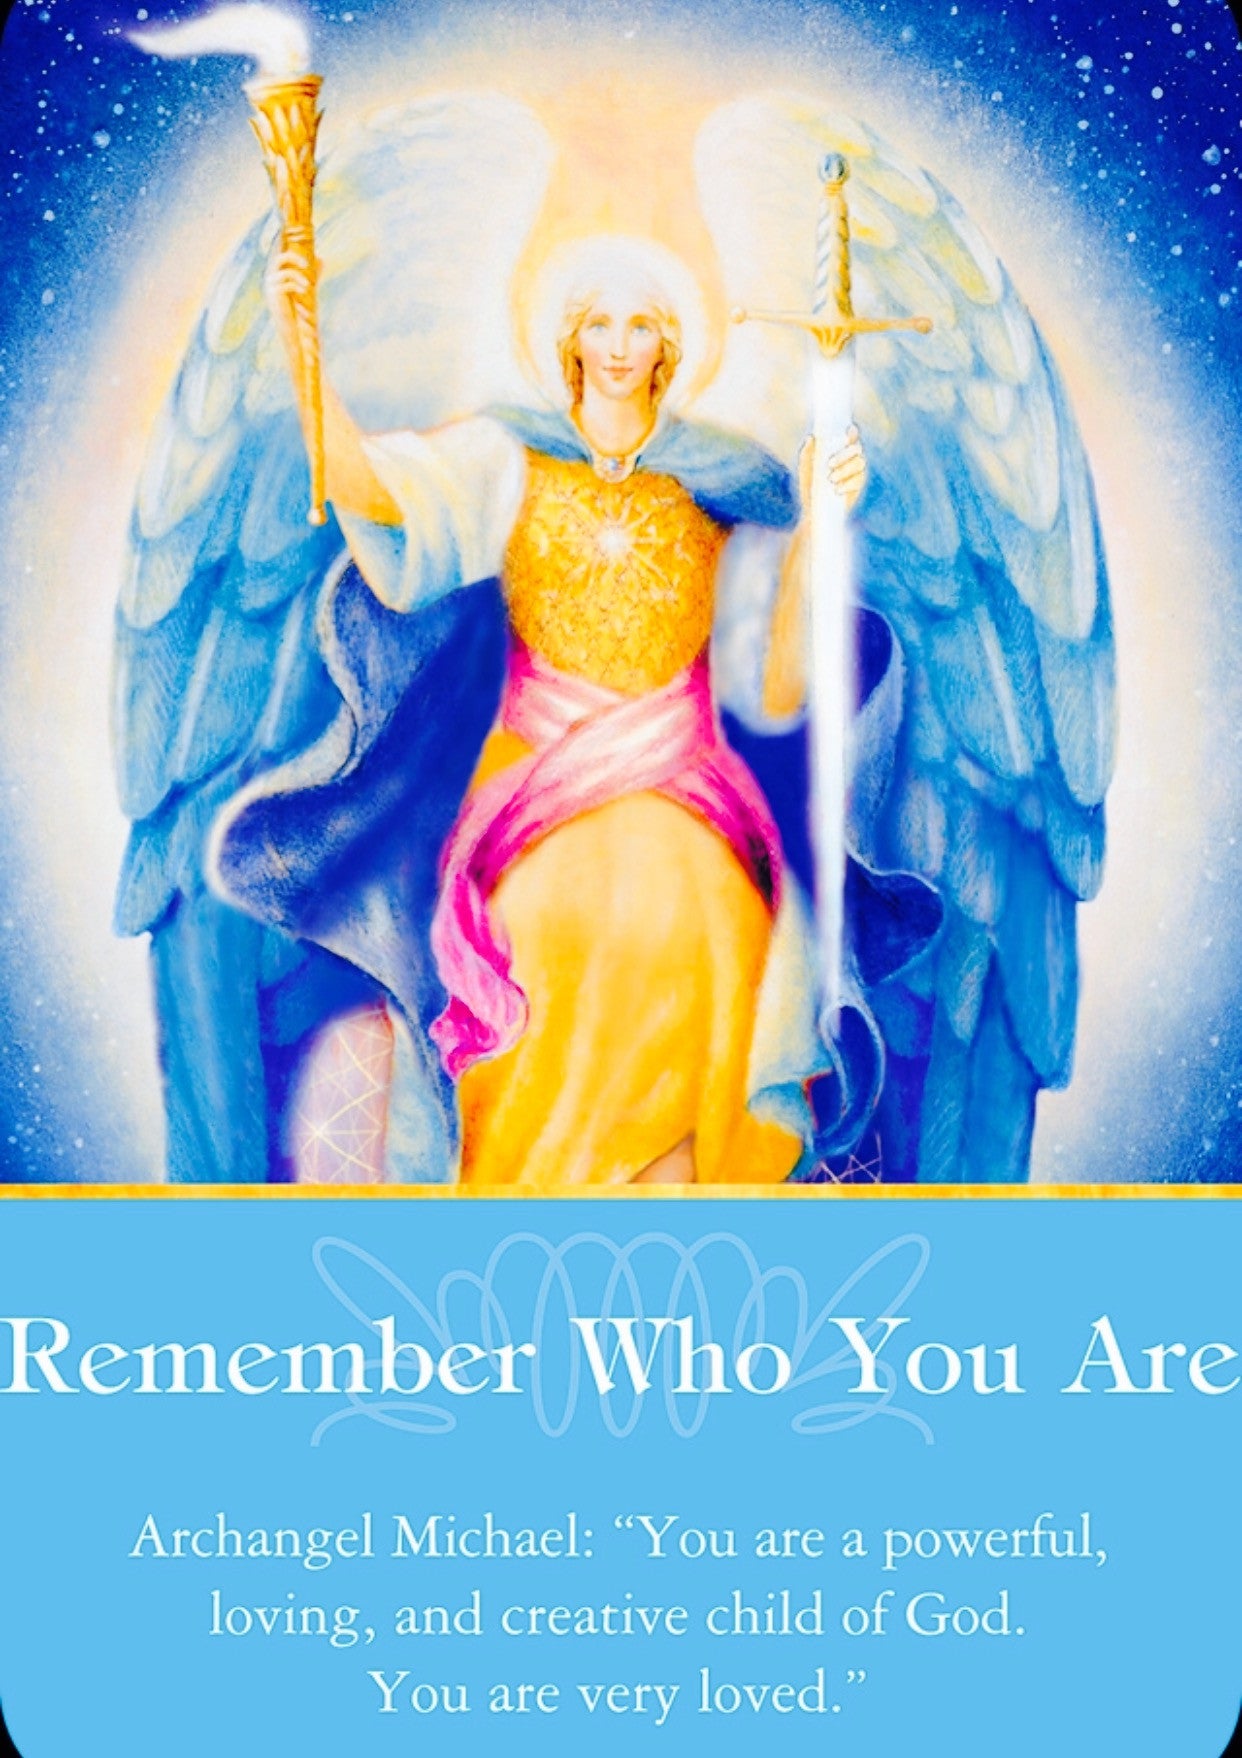 Archangel Michael: “You are a powerful, loving, and creative child of God. You are very loved”